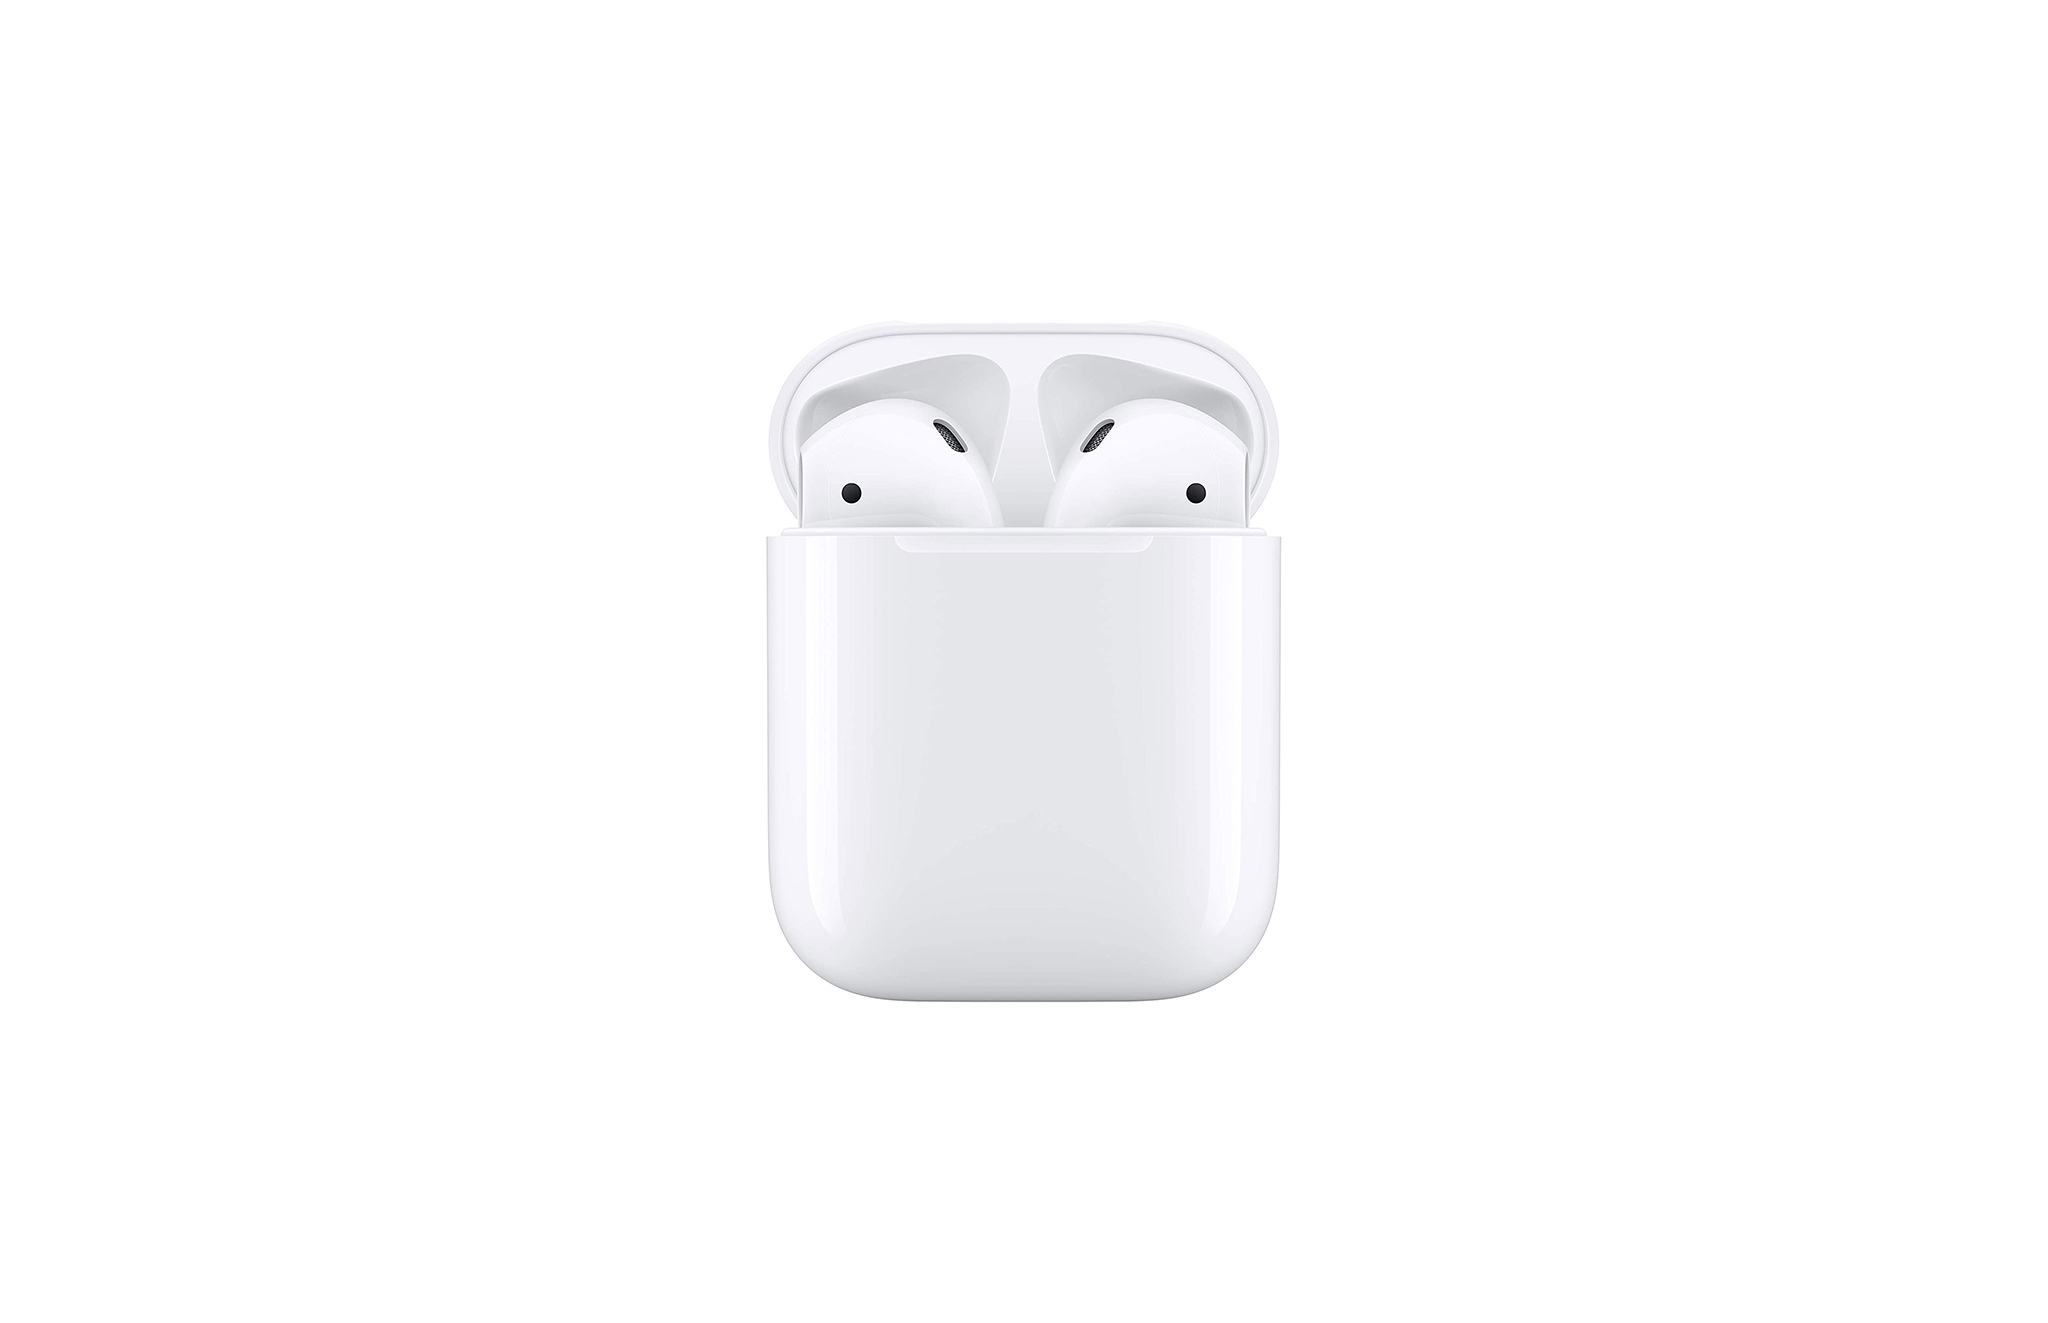 Apple Airpods with Wired Charging Case Amazon